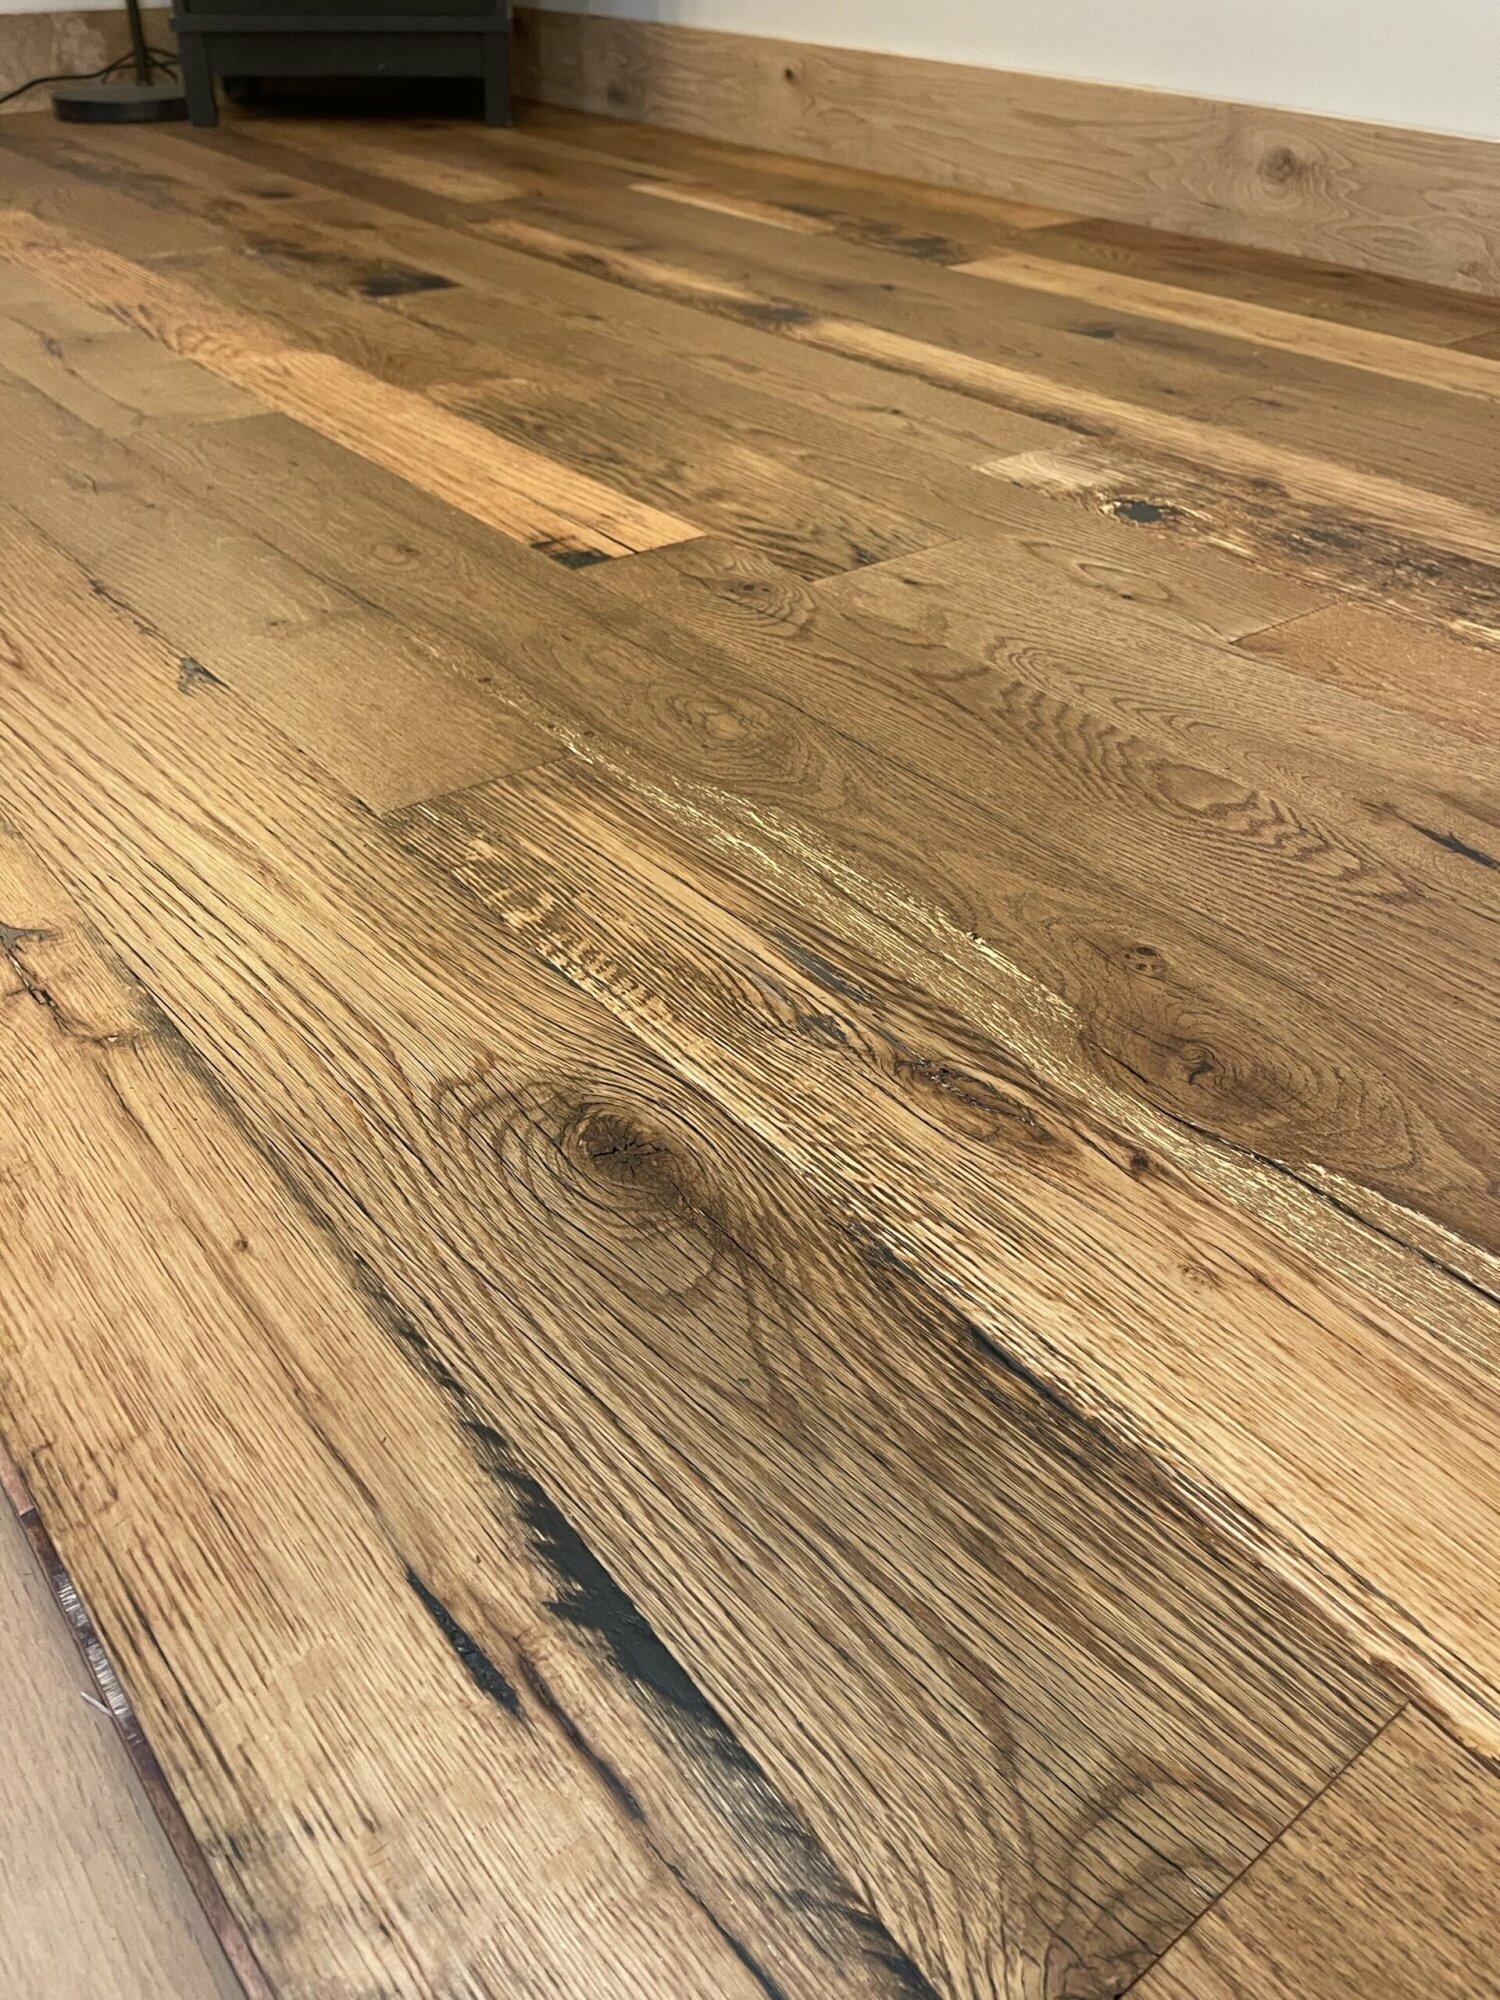 close up of Reclaimed Kentucky Race Horse Fence Plank flooring showing various color tones and characteristics of reclaimed wood such as grain patterns and knots.